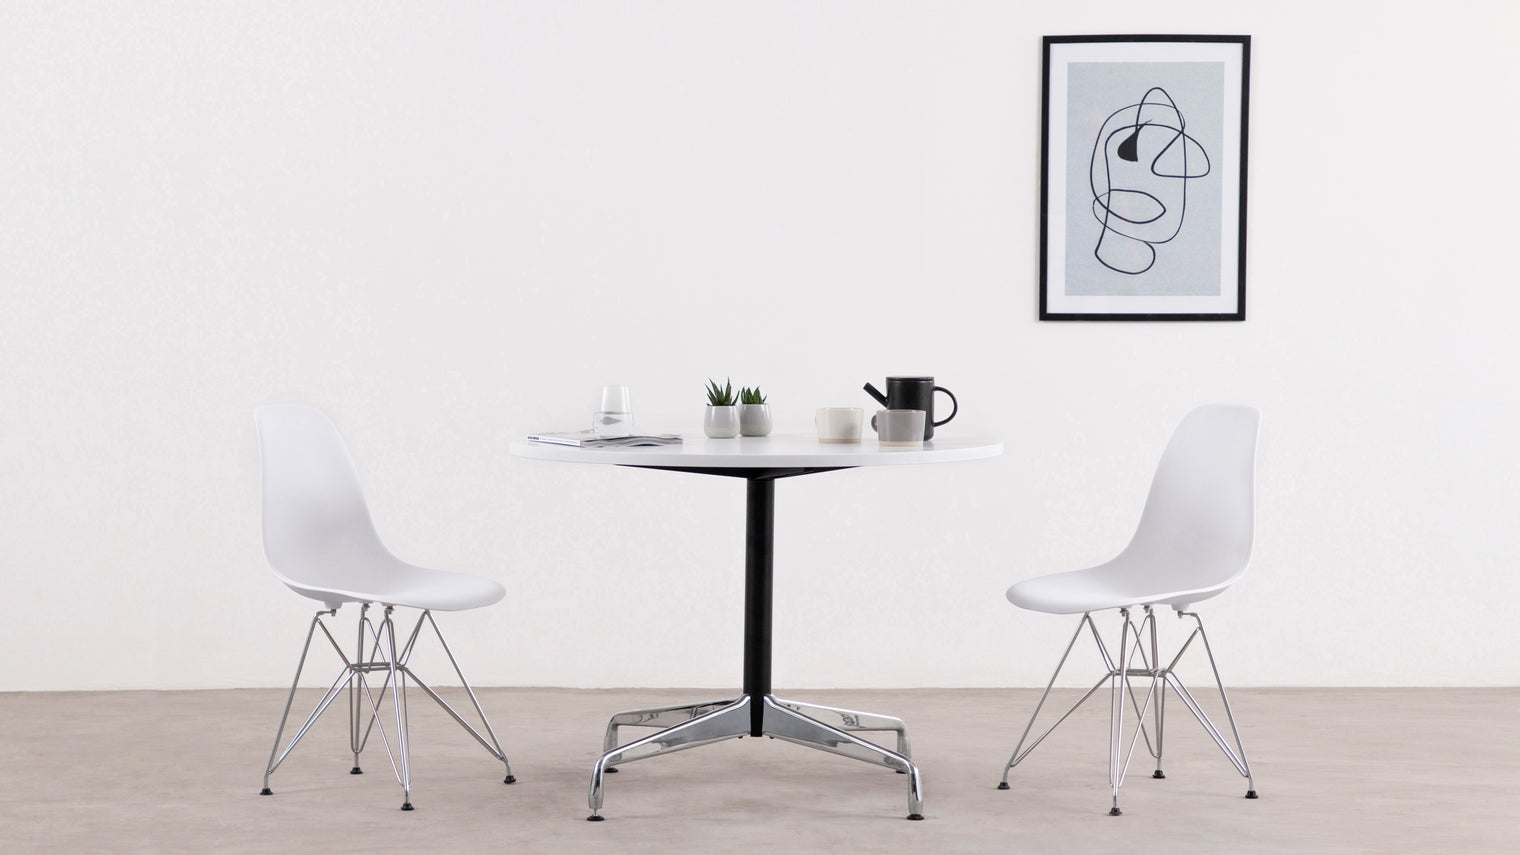 Built to impress|At first glance, it may appear that this table is simplistic in its design. However, the perfect fusion of durable steel and flawlessly beautiful wood result in a minimalistic design that’s quite complex in its construction.
